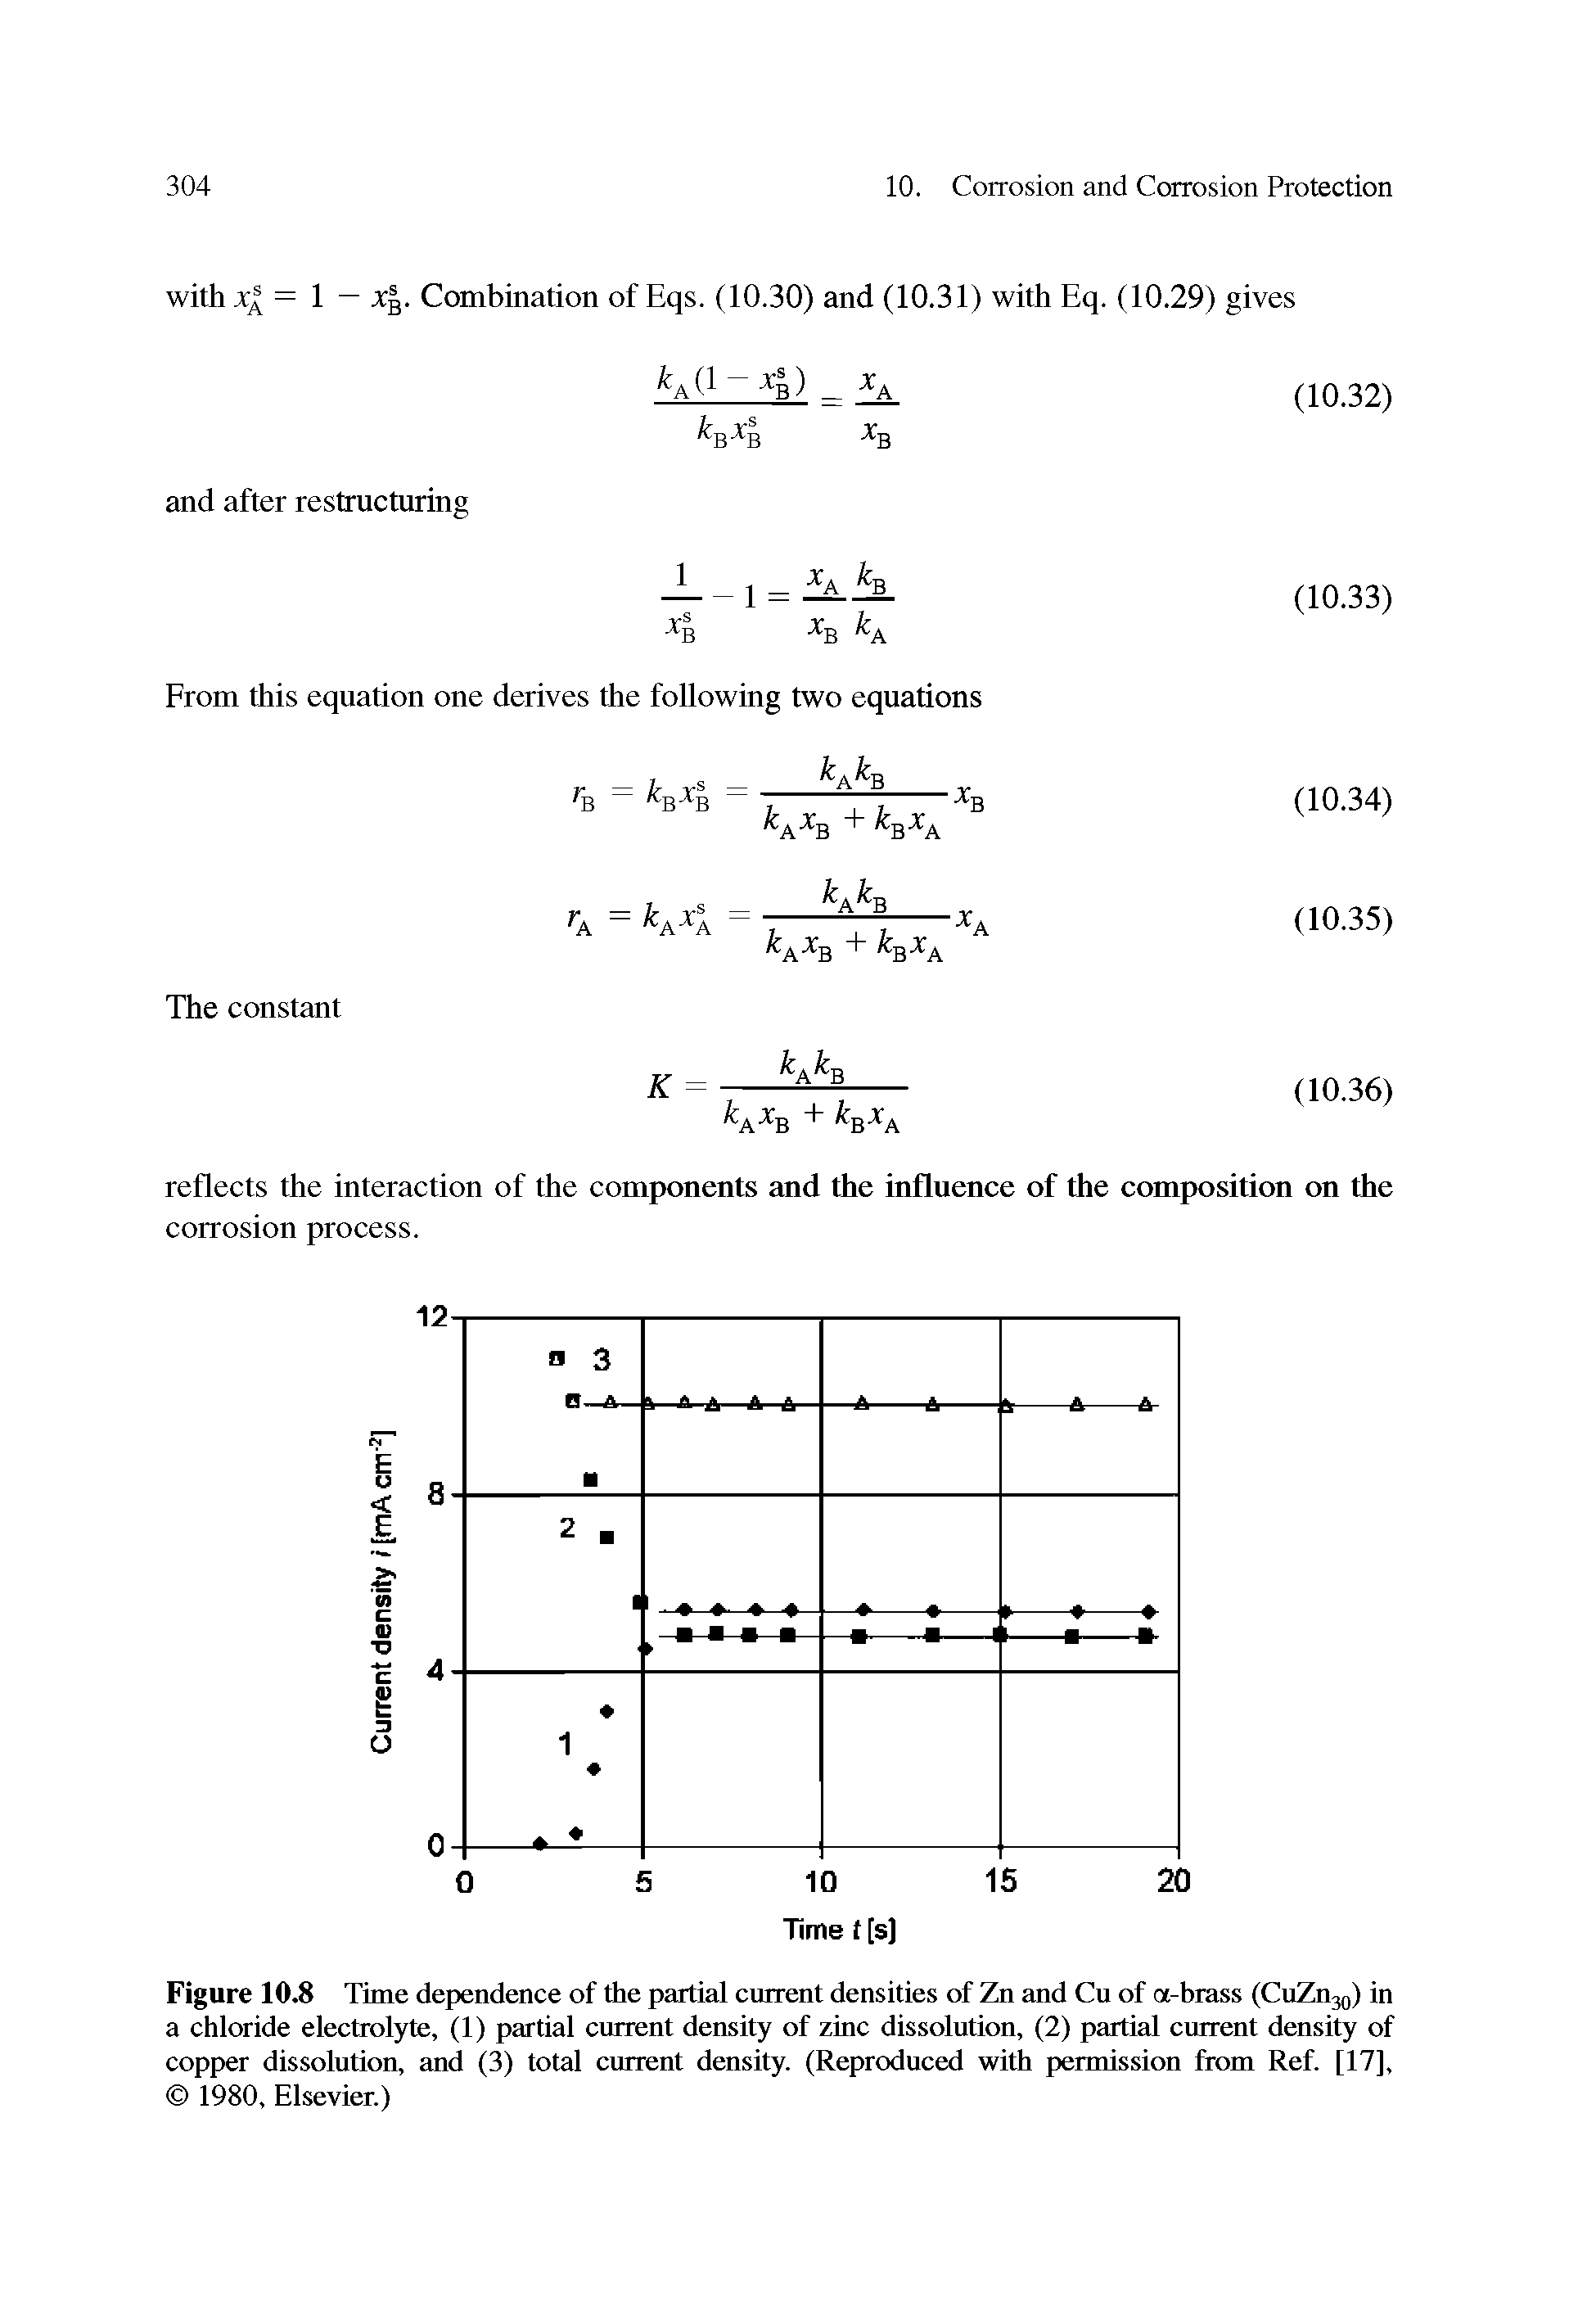 Figure 10 Time dependence of the partial current densities of Zn and Cu of a-brass (CuZujq) in a chloride electrolyte, (1) partial current density of zinc dissolution, (2) partial current density of copper dissolution, and (3) total current density. (Reproduced with permission from Ref. [17], 1980, Elsevier.)...